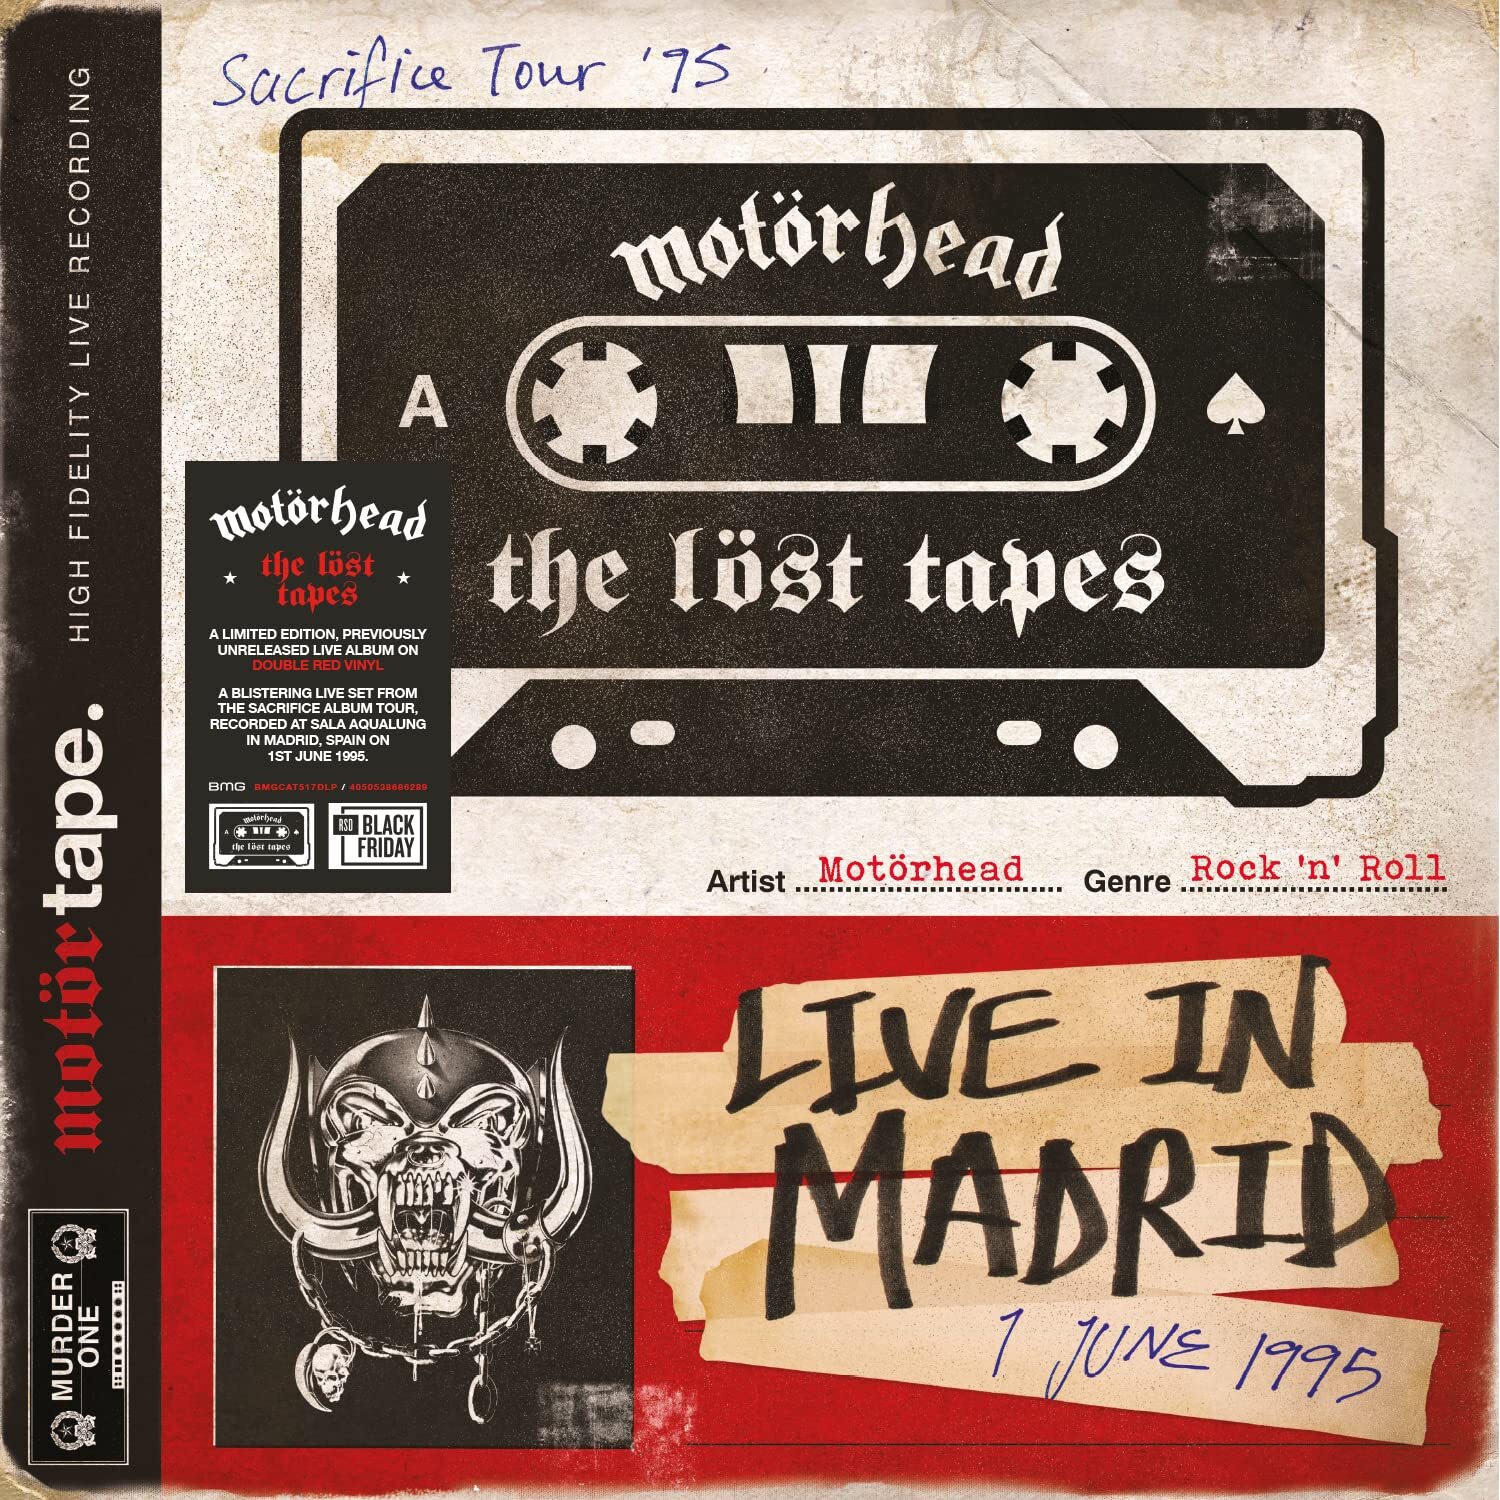 Рок Warner Music Motorhead - The Lost Tapes Vol. 1 Live In Madrid 1 June 1995 (Limited Edition Coloured Vinyl 2LP) электроника warner music a ha hunting high and low coloured vinyl lp